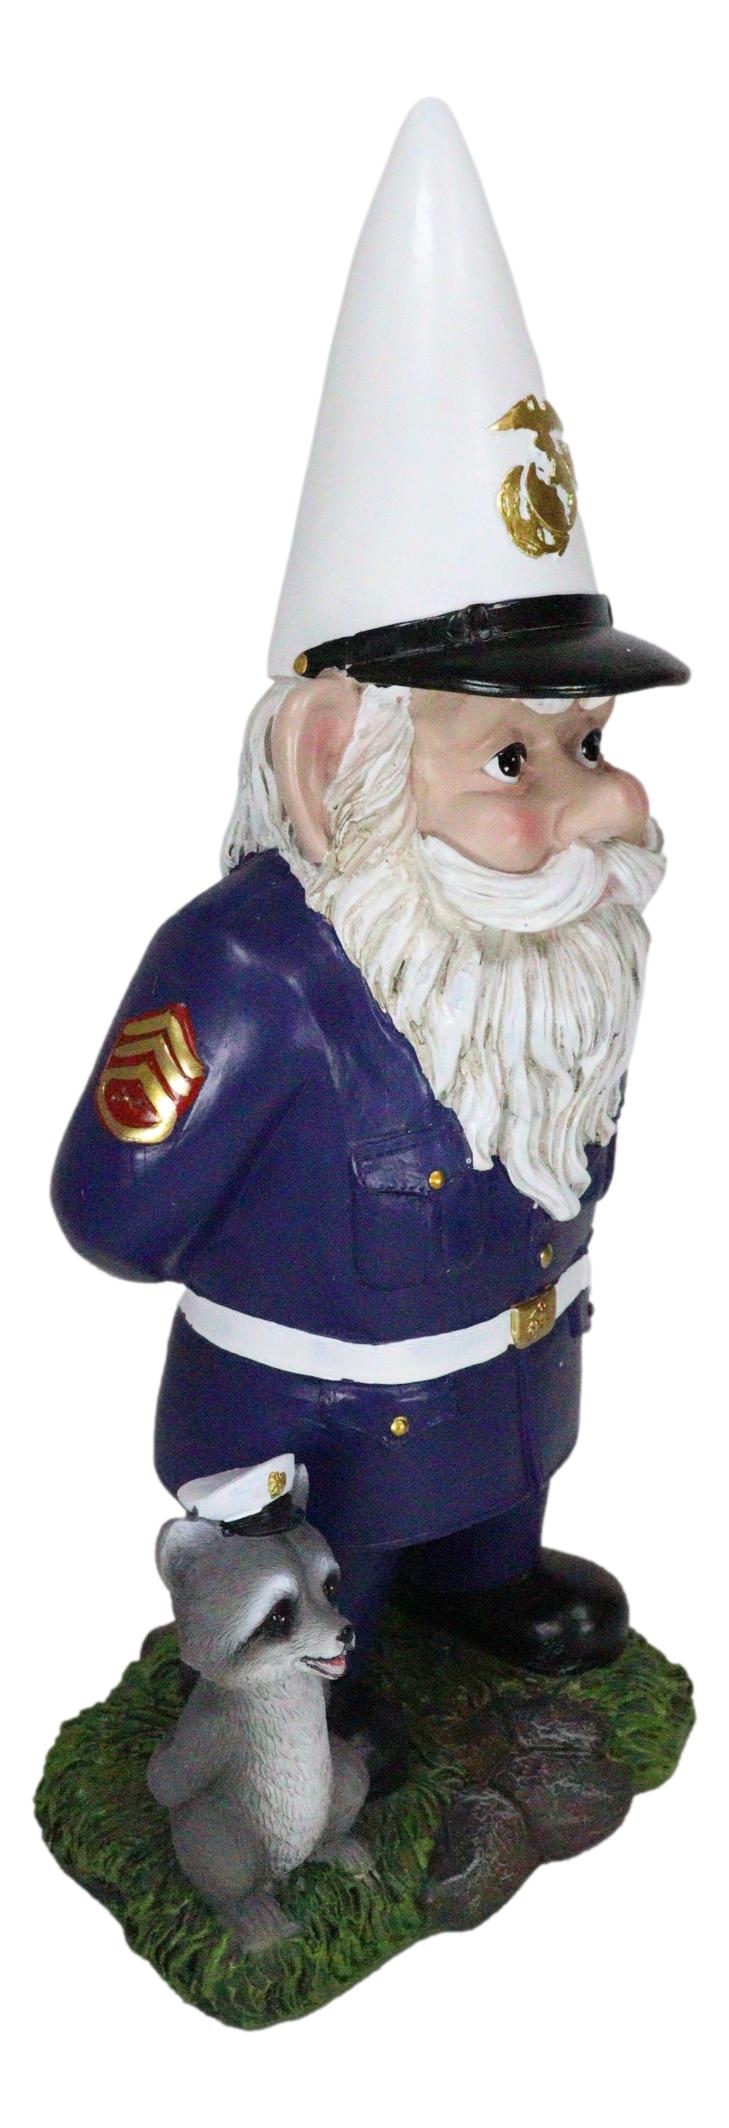 USA Patriotic Armed Forces Semper Fidelis Marine Gnome With Raccoon Statue